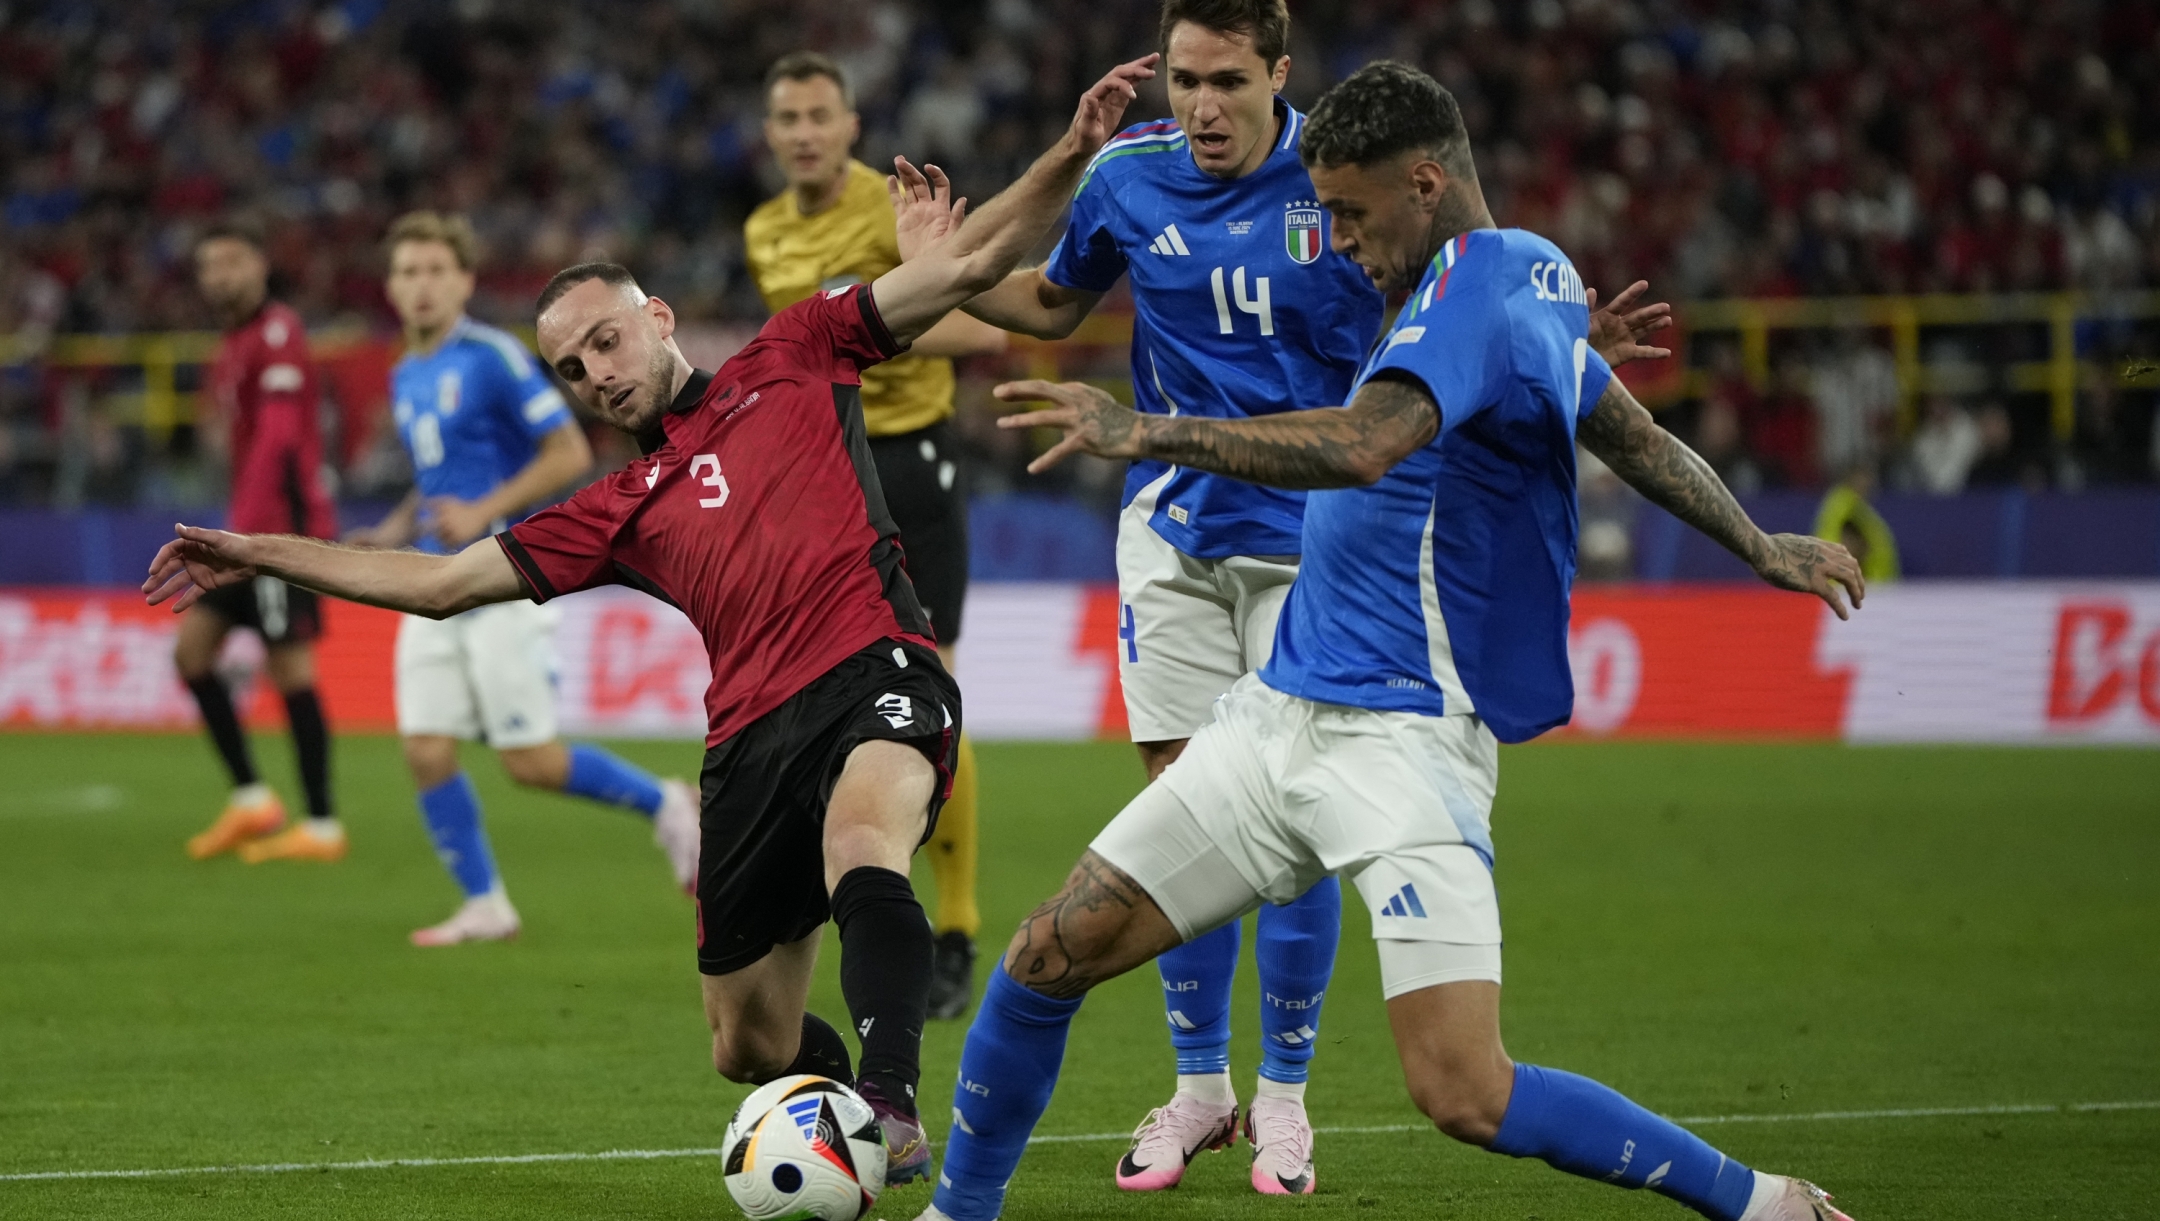 Albania's Mario Mitaj, left, fights for the ball with Italy's Federico Chiesa, center, and Italy's Gianluca Scamacca during a Group B match between Italy and Albania at the Euro 2024 soccer tournament in Dortmund, Germany, Saturday, June 15, 2024. (AP Photo/Alessandra Tarantino)